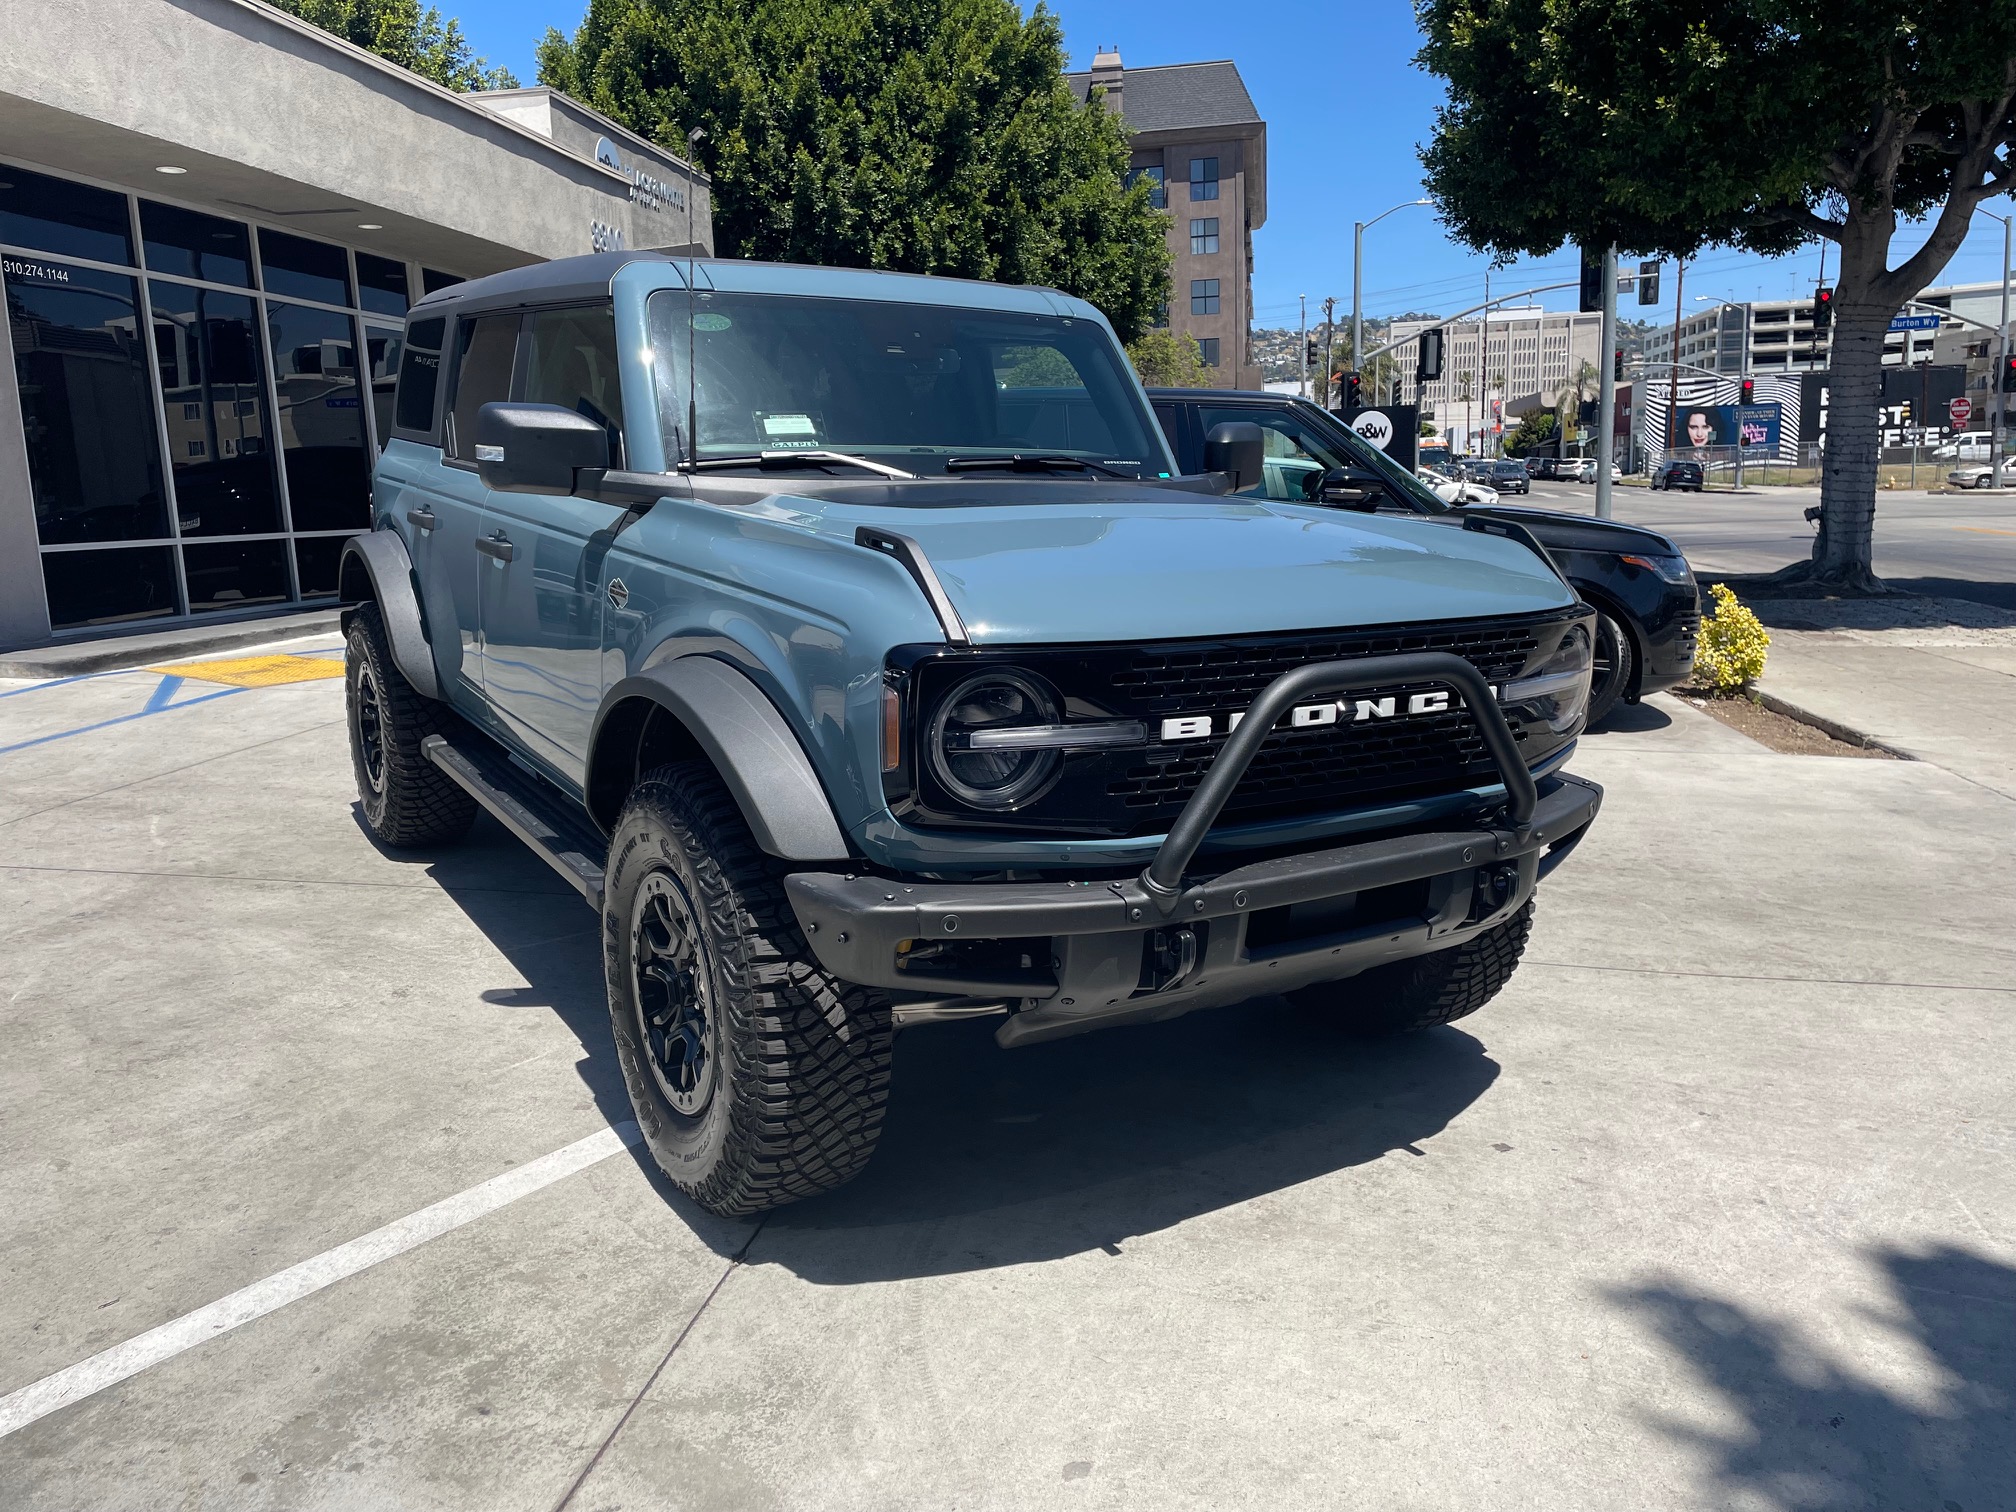 Where to Rent a Ford Bronco: Top Locations and Deals